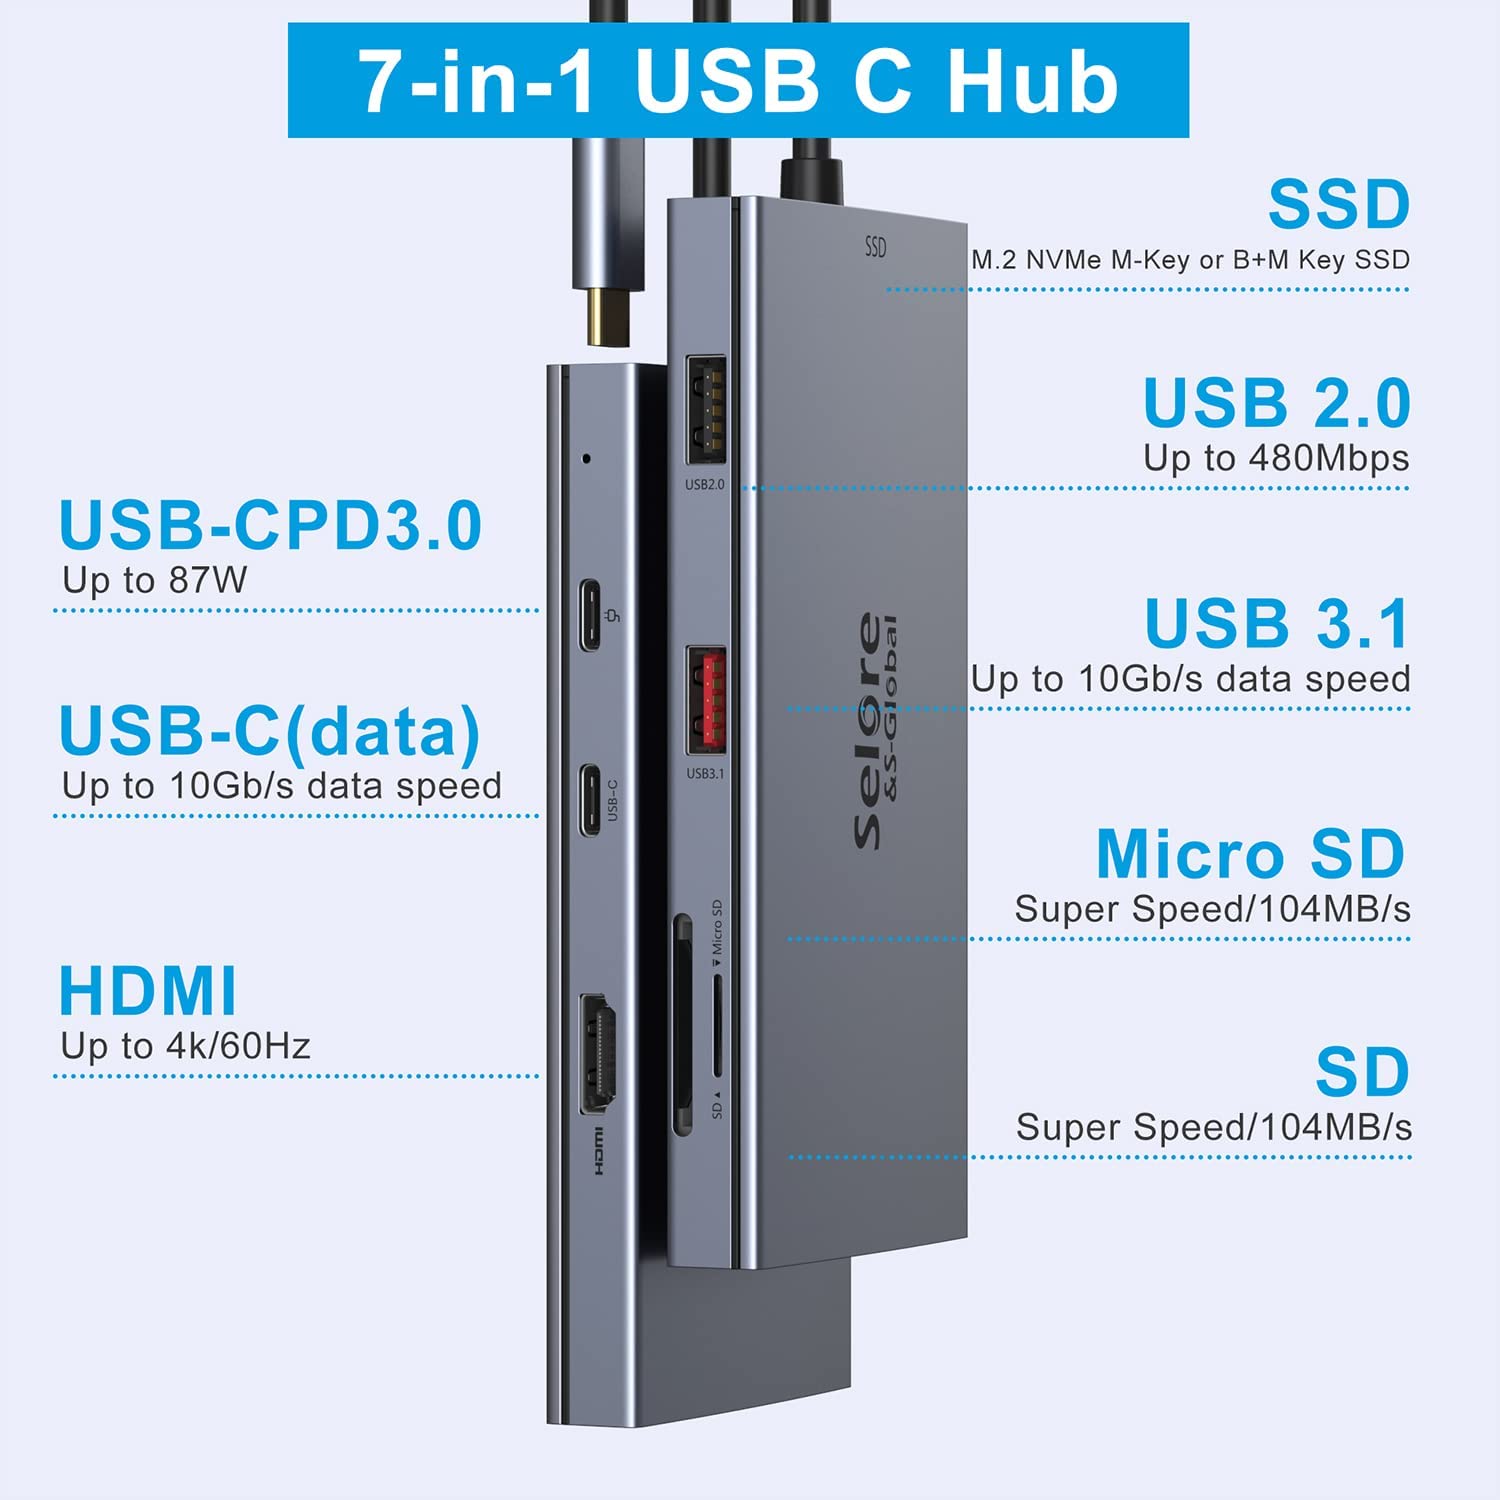 What Is A SSD? What's The Difference Between It & A Mobile Hard Drive?